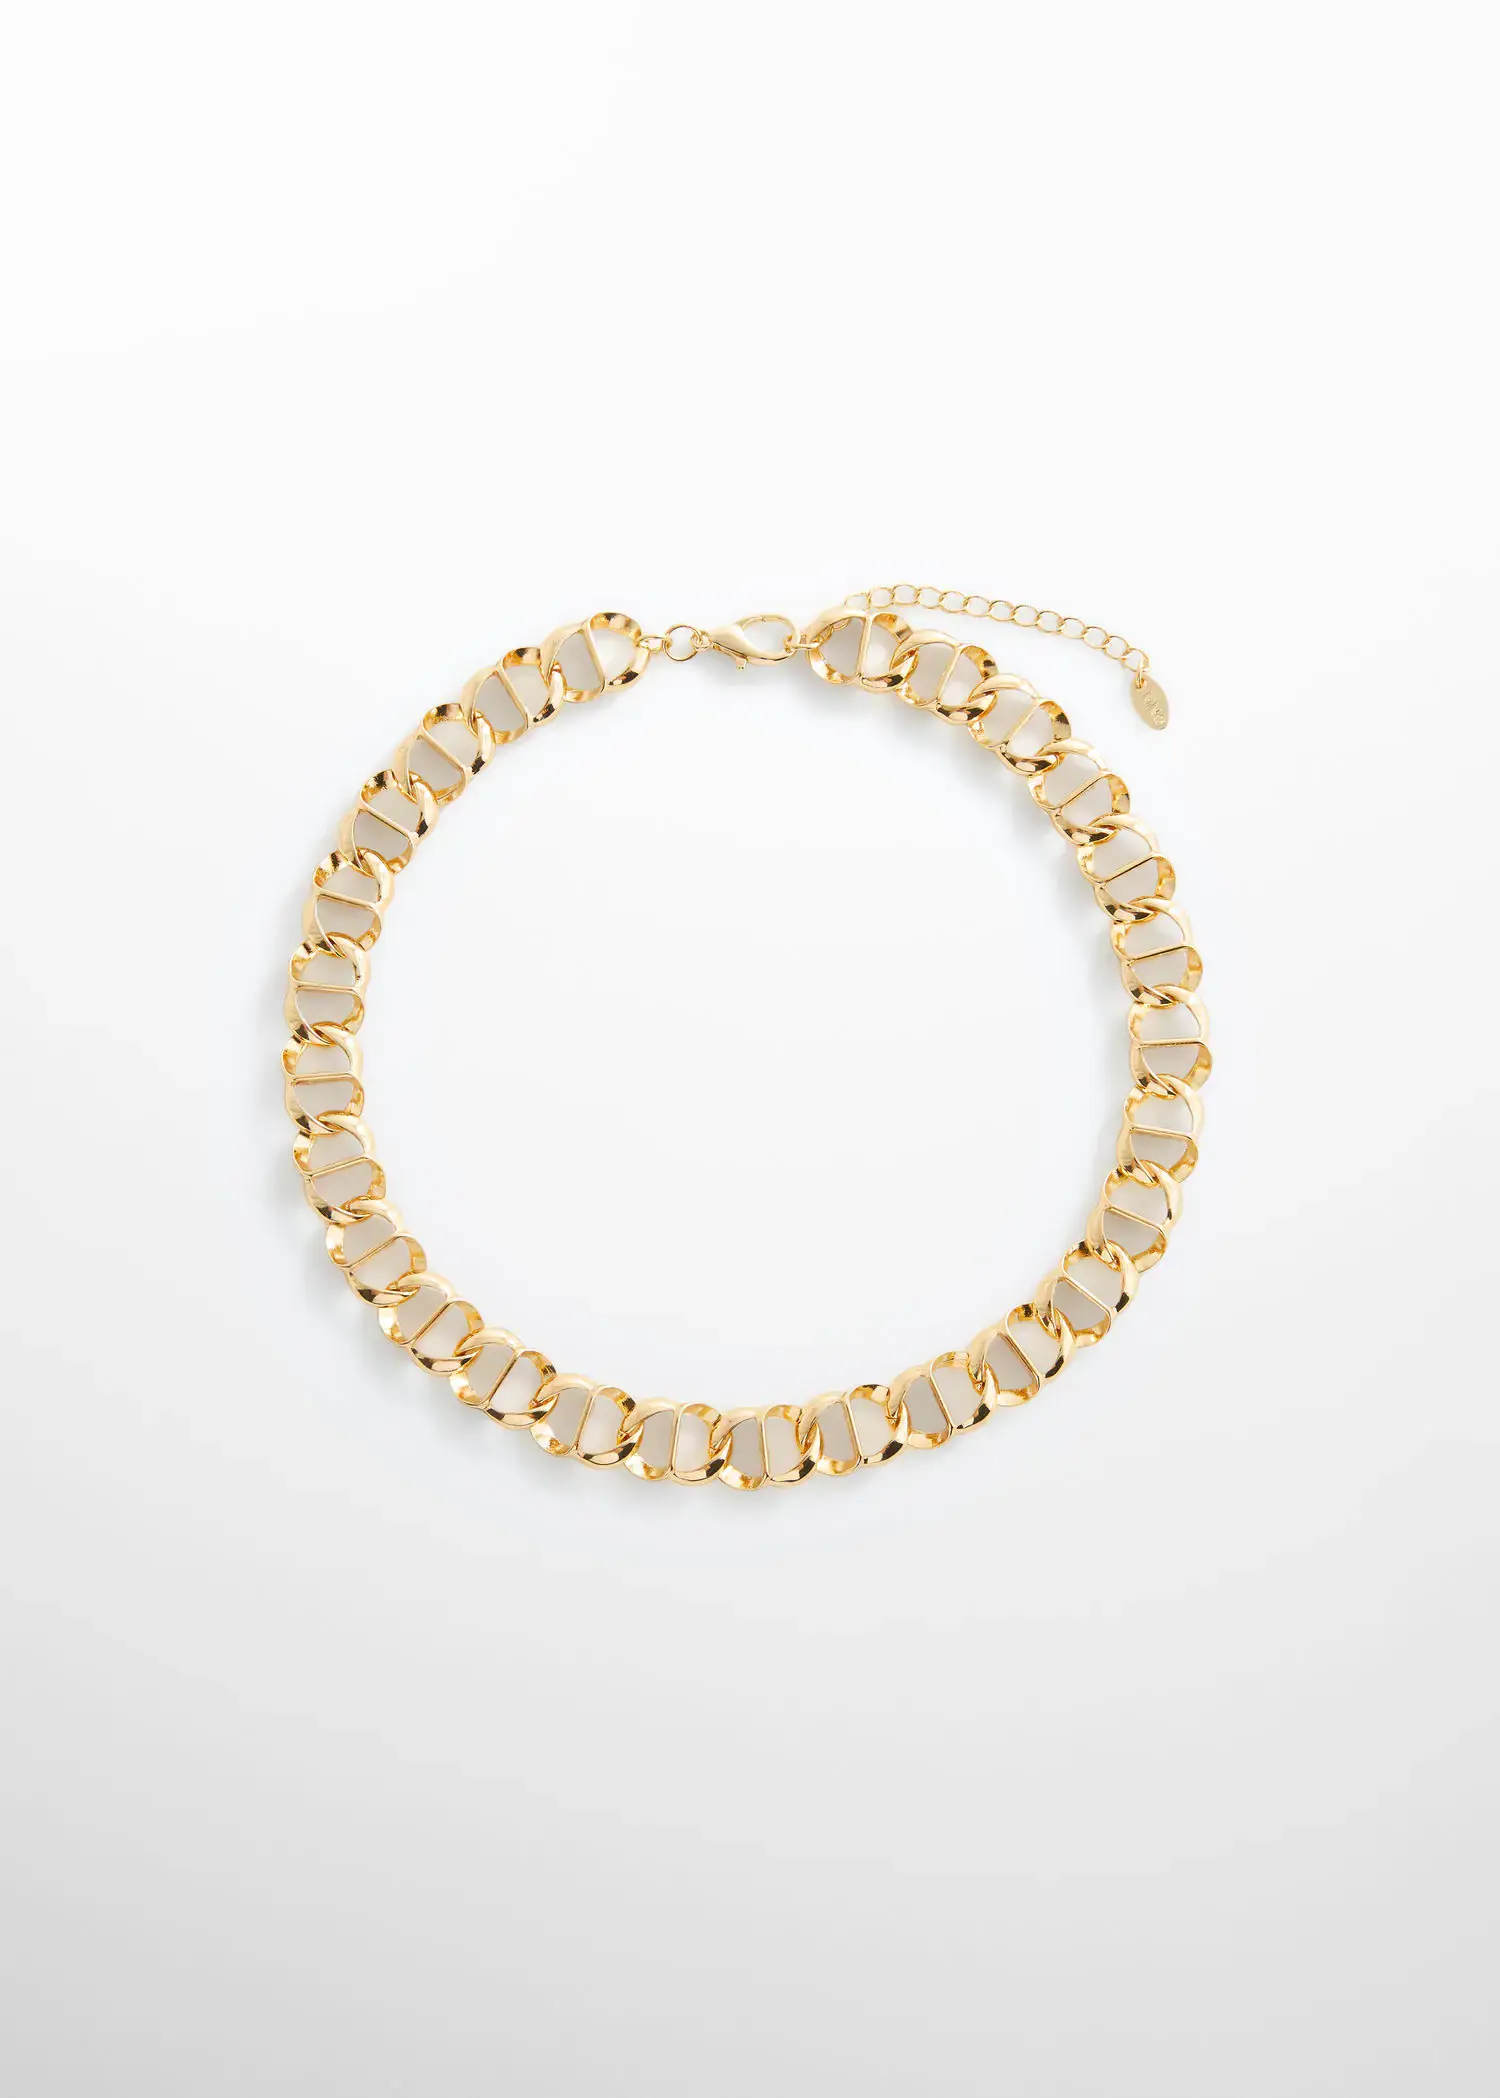 Mango Link chain necklace. 1